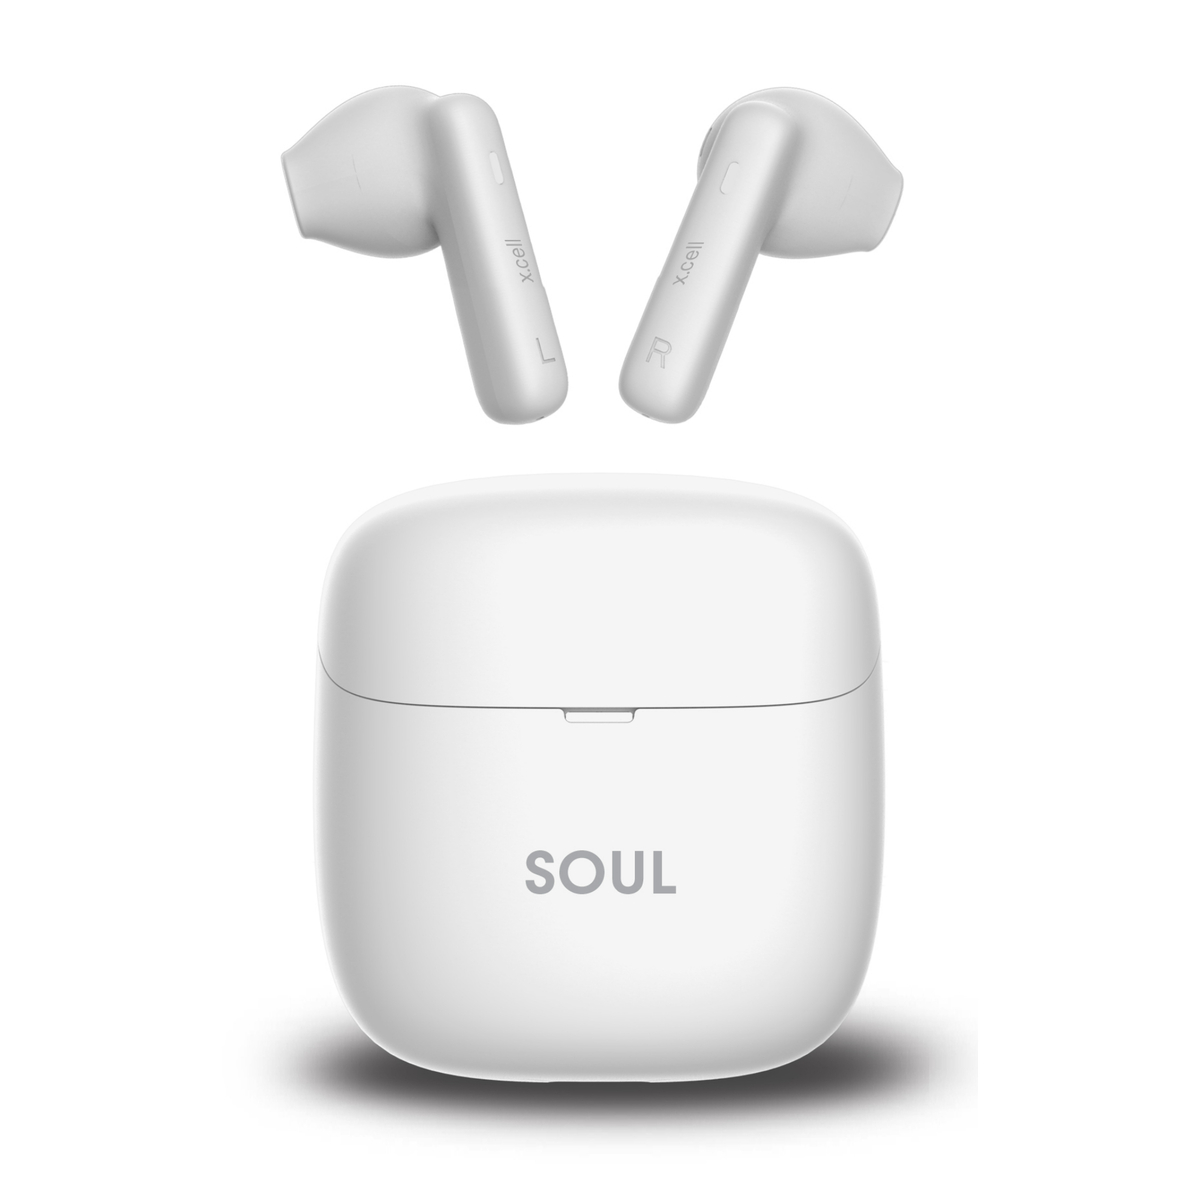 X.Cell G9 Signature 2.01" Smart Watch, White + Soul 14 Wireless Earbuds with Mic, White